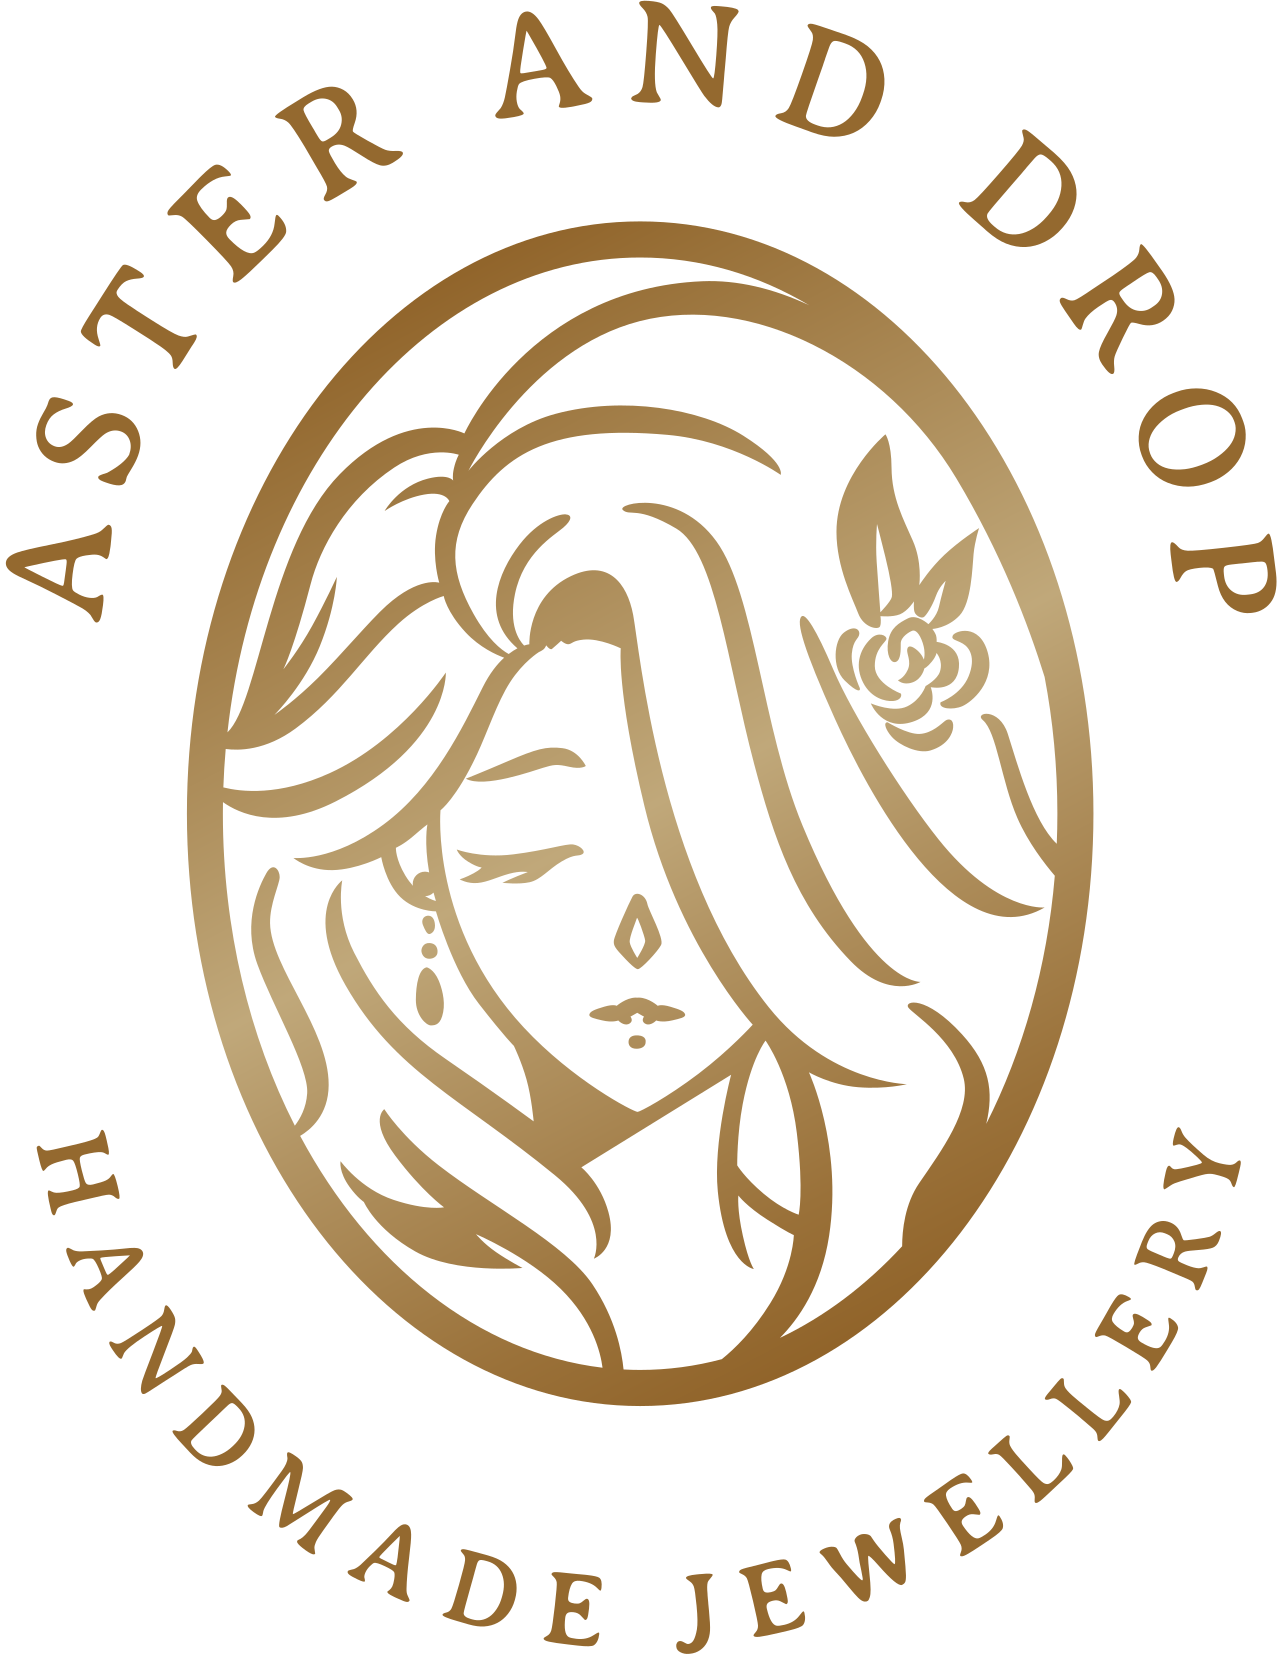 Aster and Drop's logo